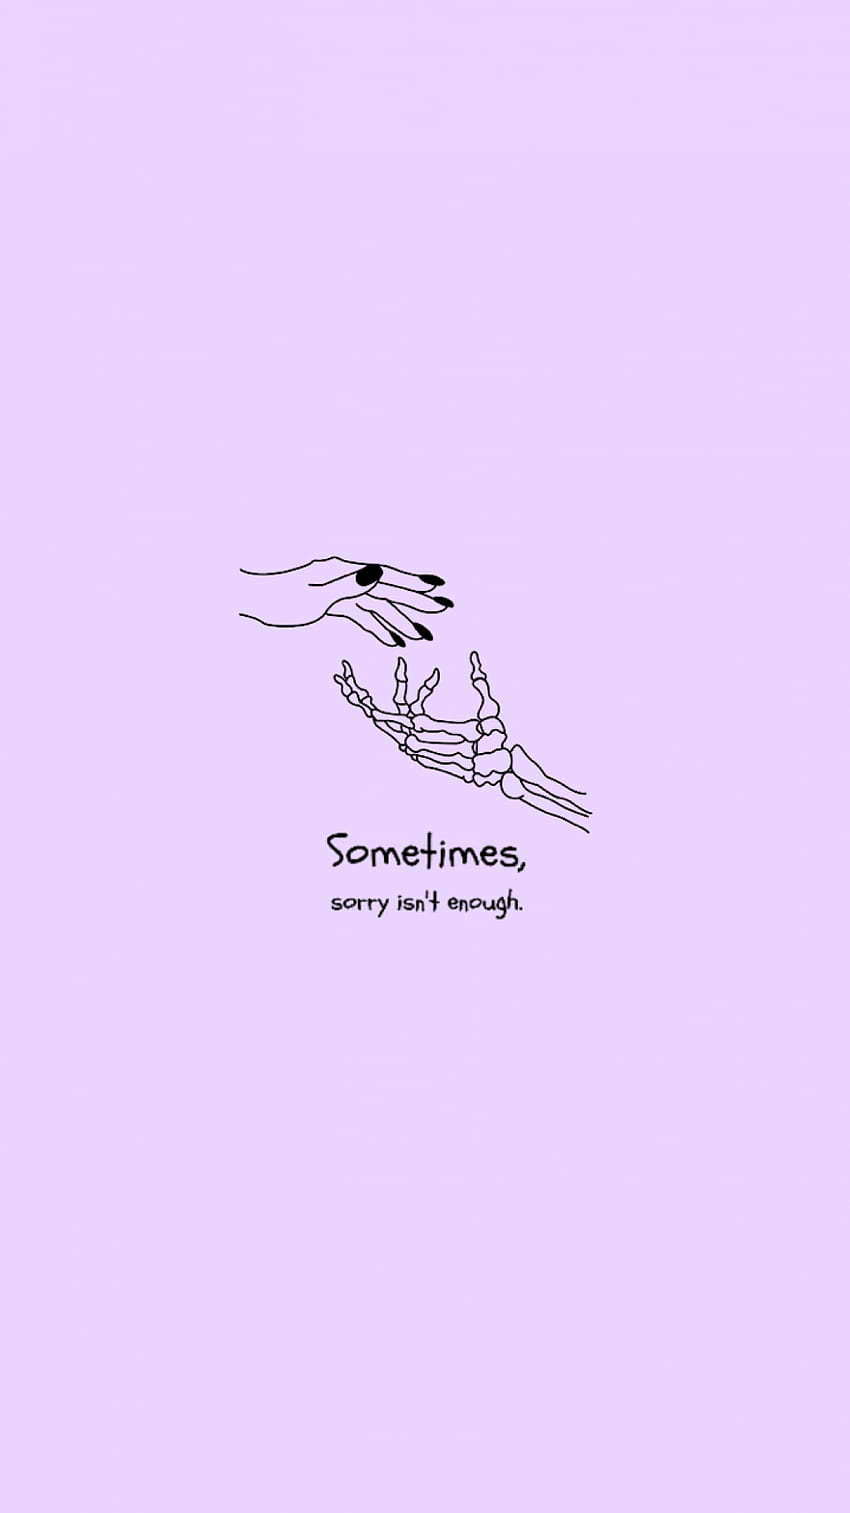 Sometimes, sorry isn't enough. - Android